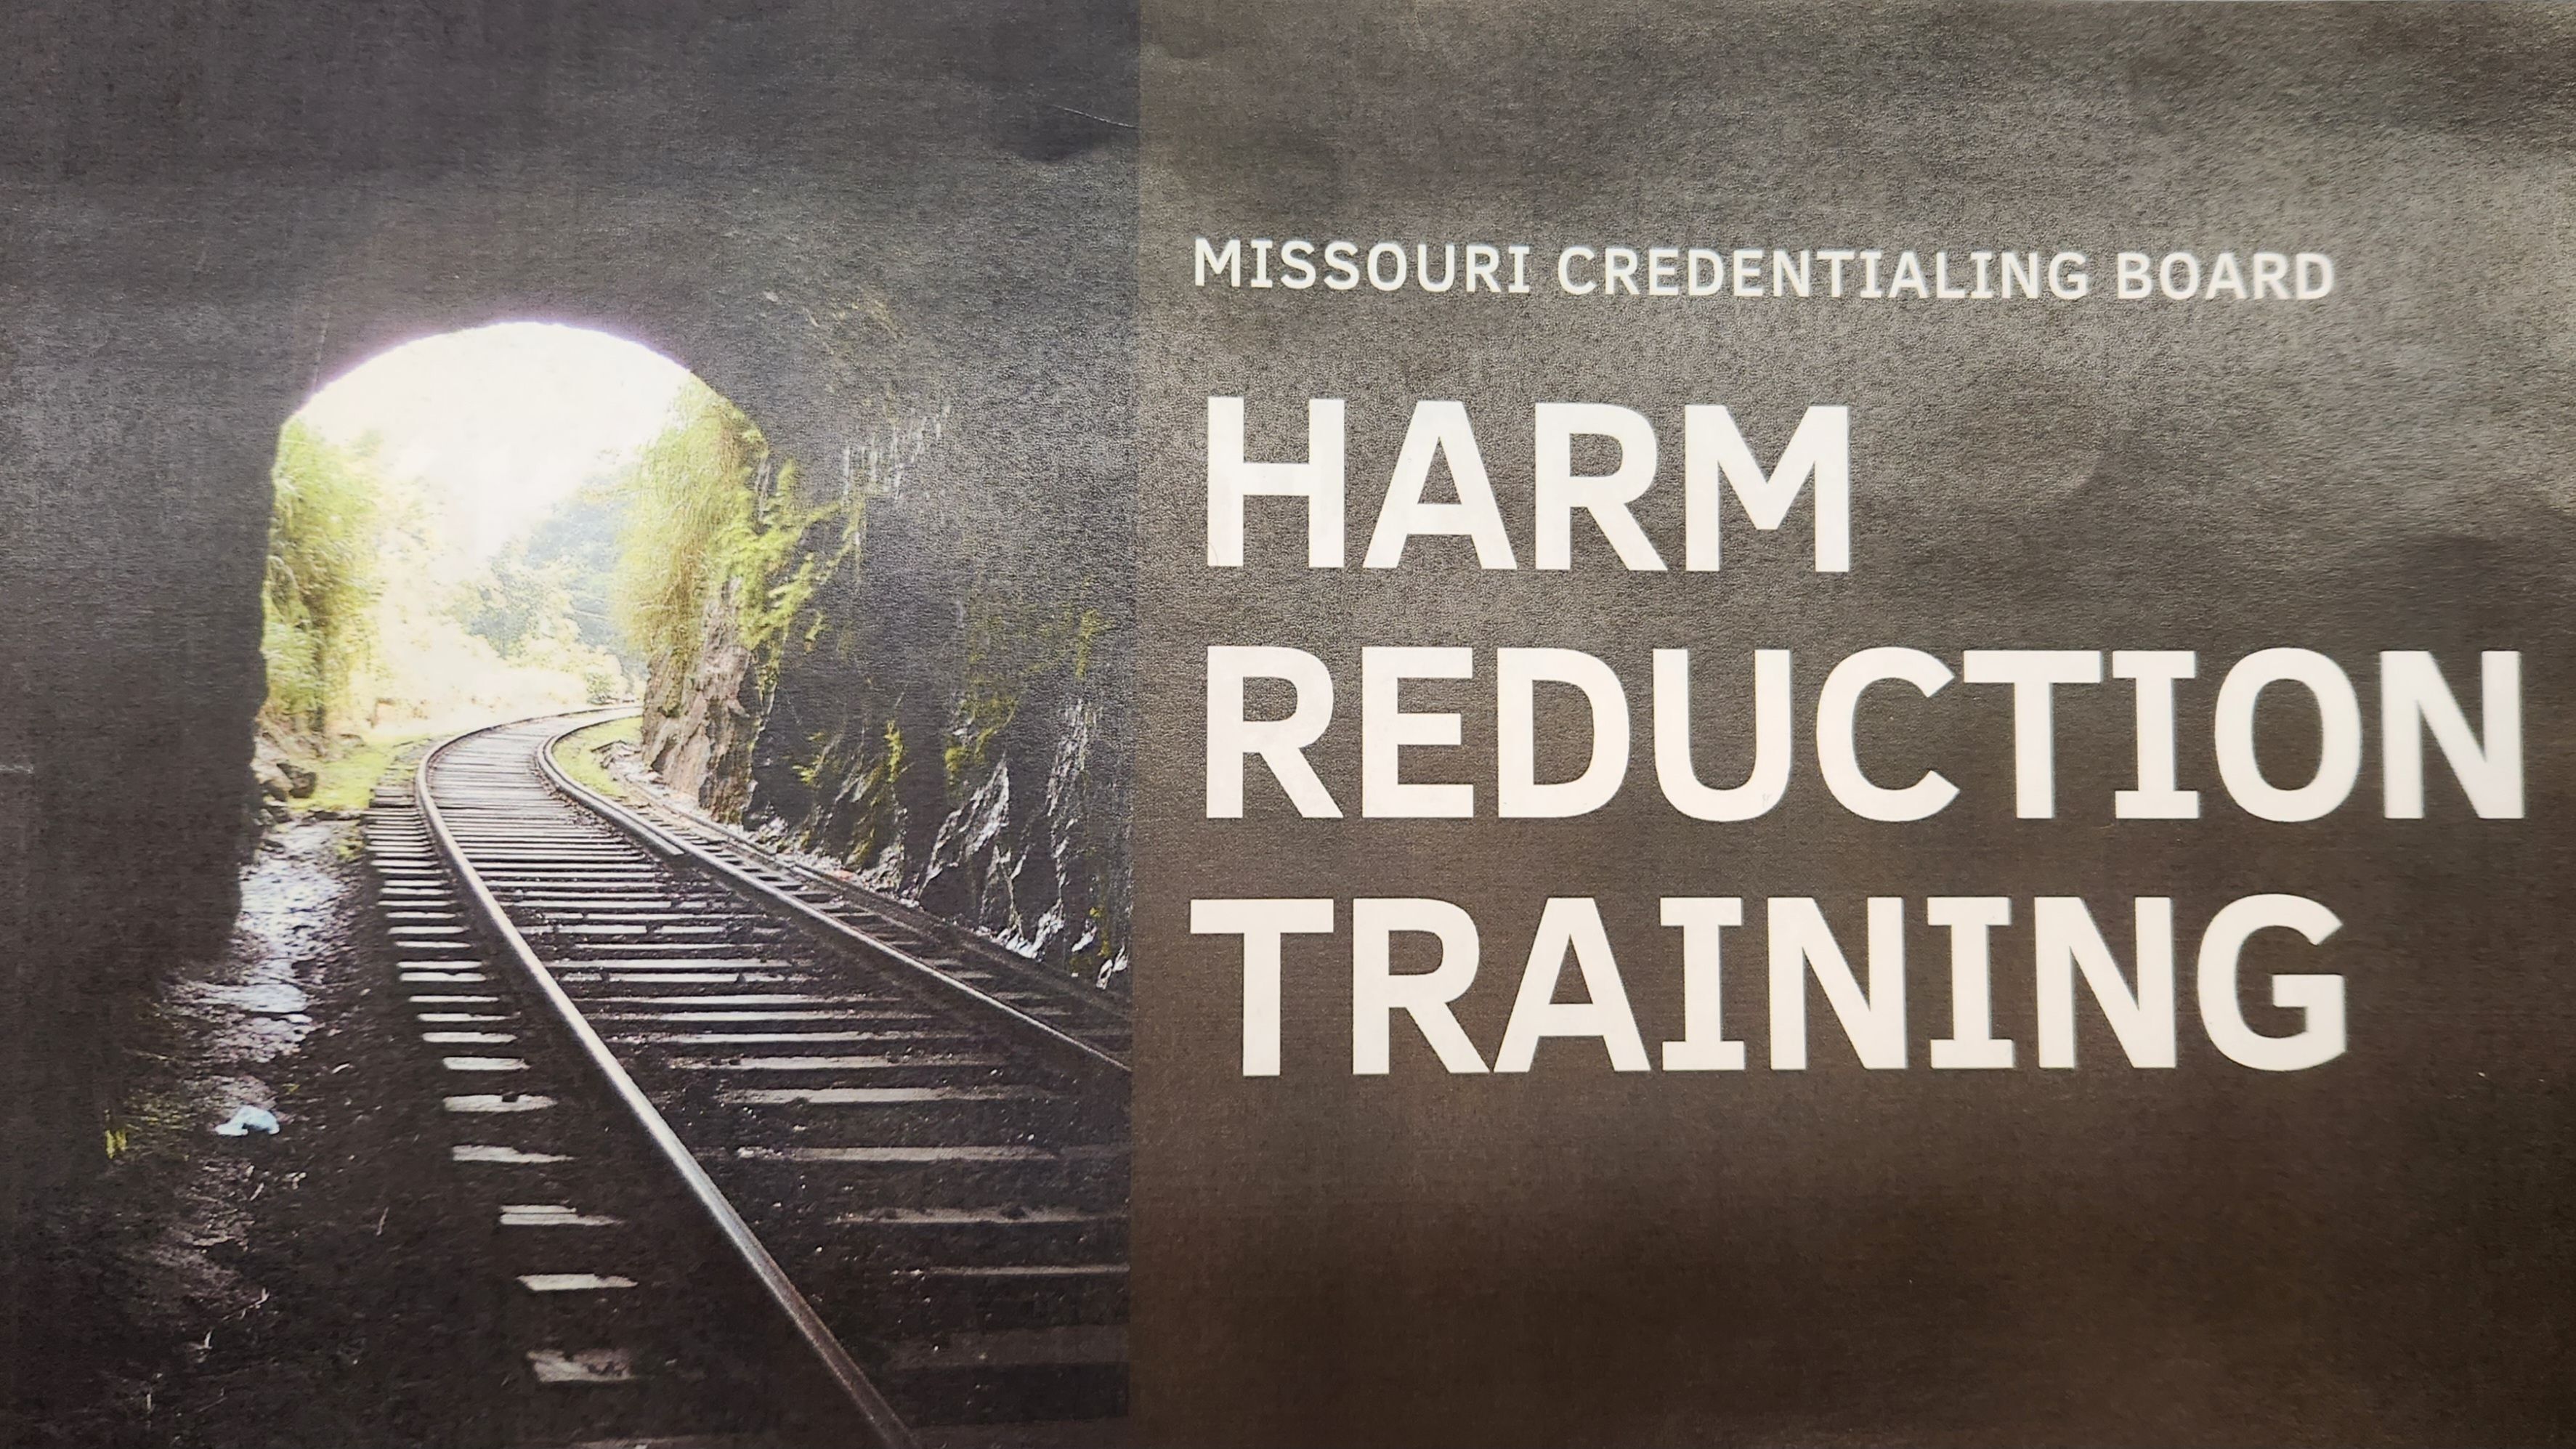 Harm Reduction Specialist Training, Co-Created by Ken Vick, Benilde Hall Executive Director, is First State Credential to Roll Out Internationally